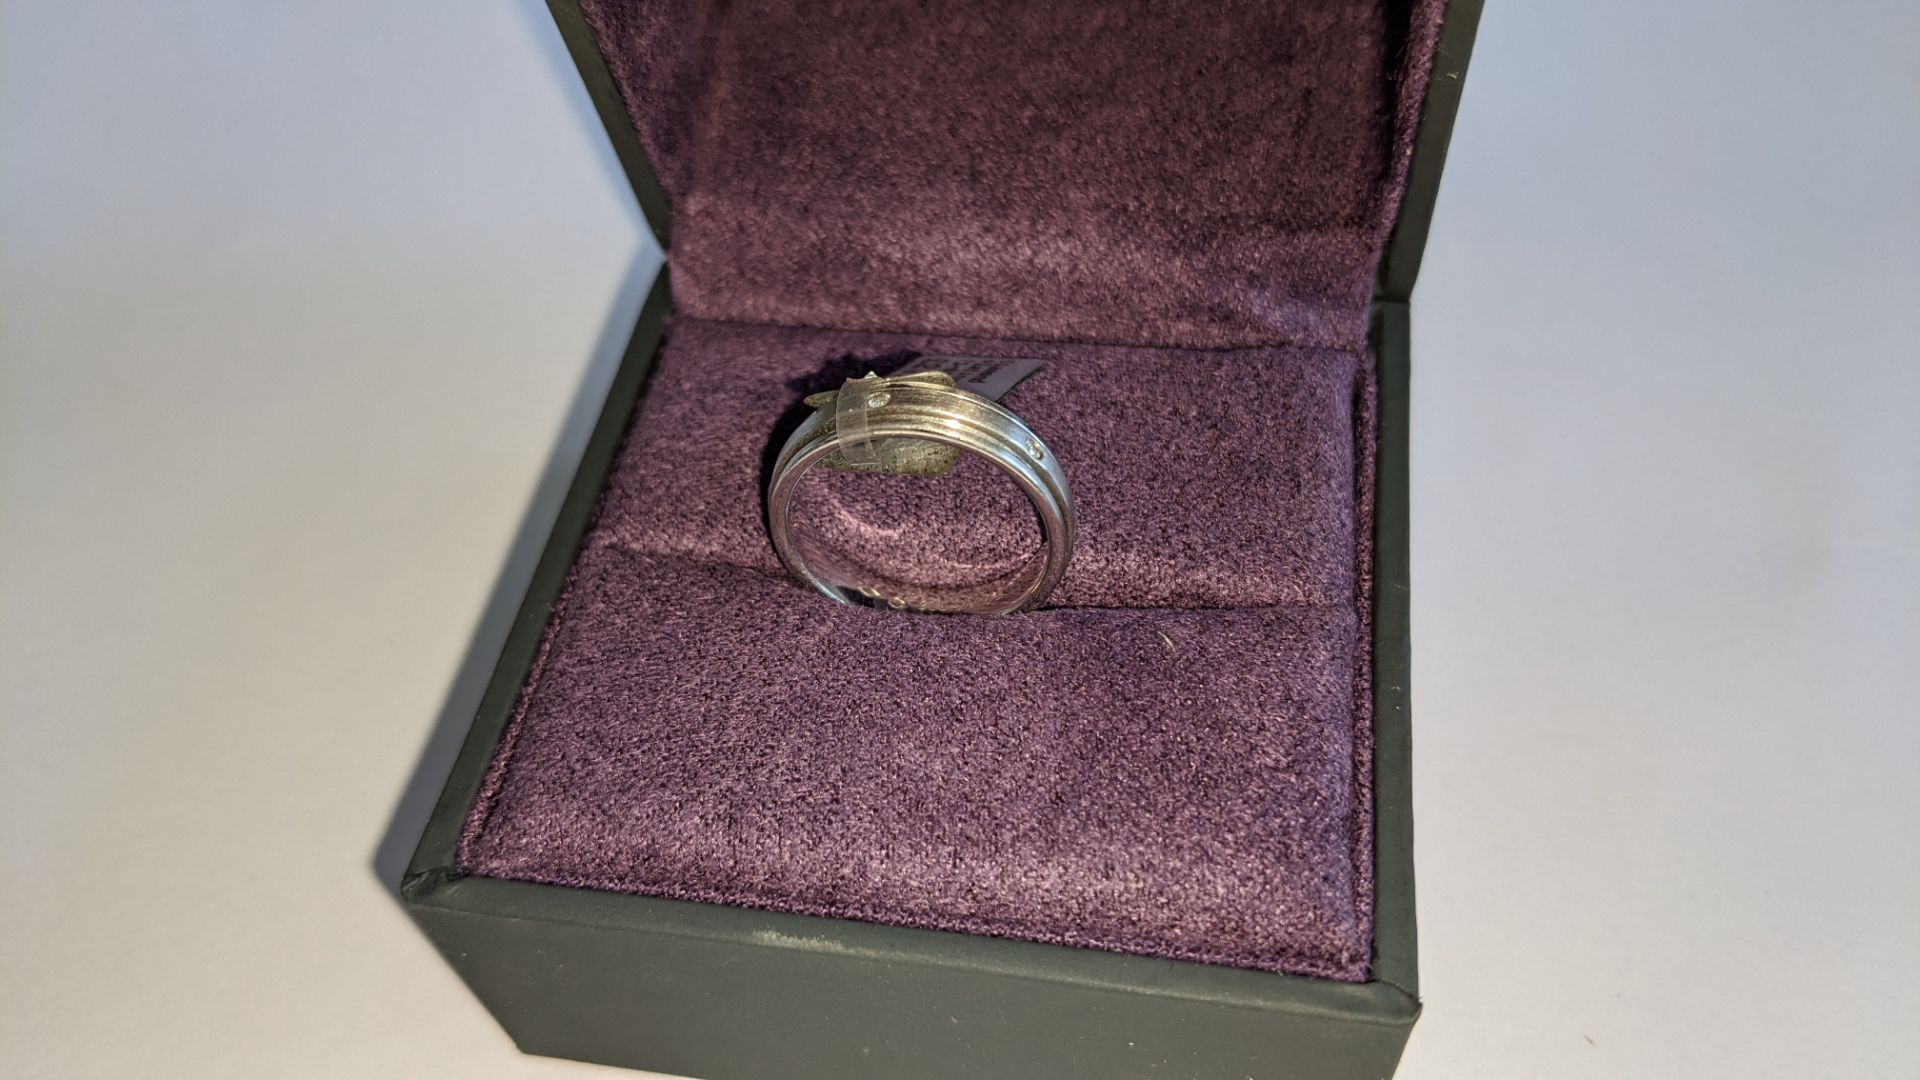 Diamond & platinum ring in platinum 950 with 6 diamonds each 0.01ct in size. RRP £2,150 - Image 3 of 16